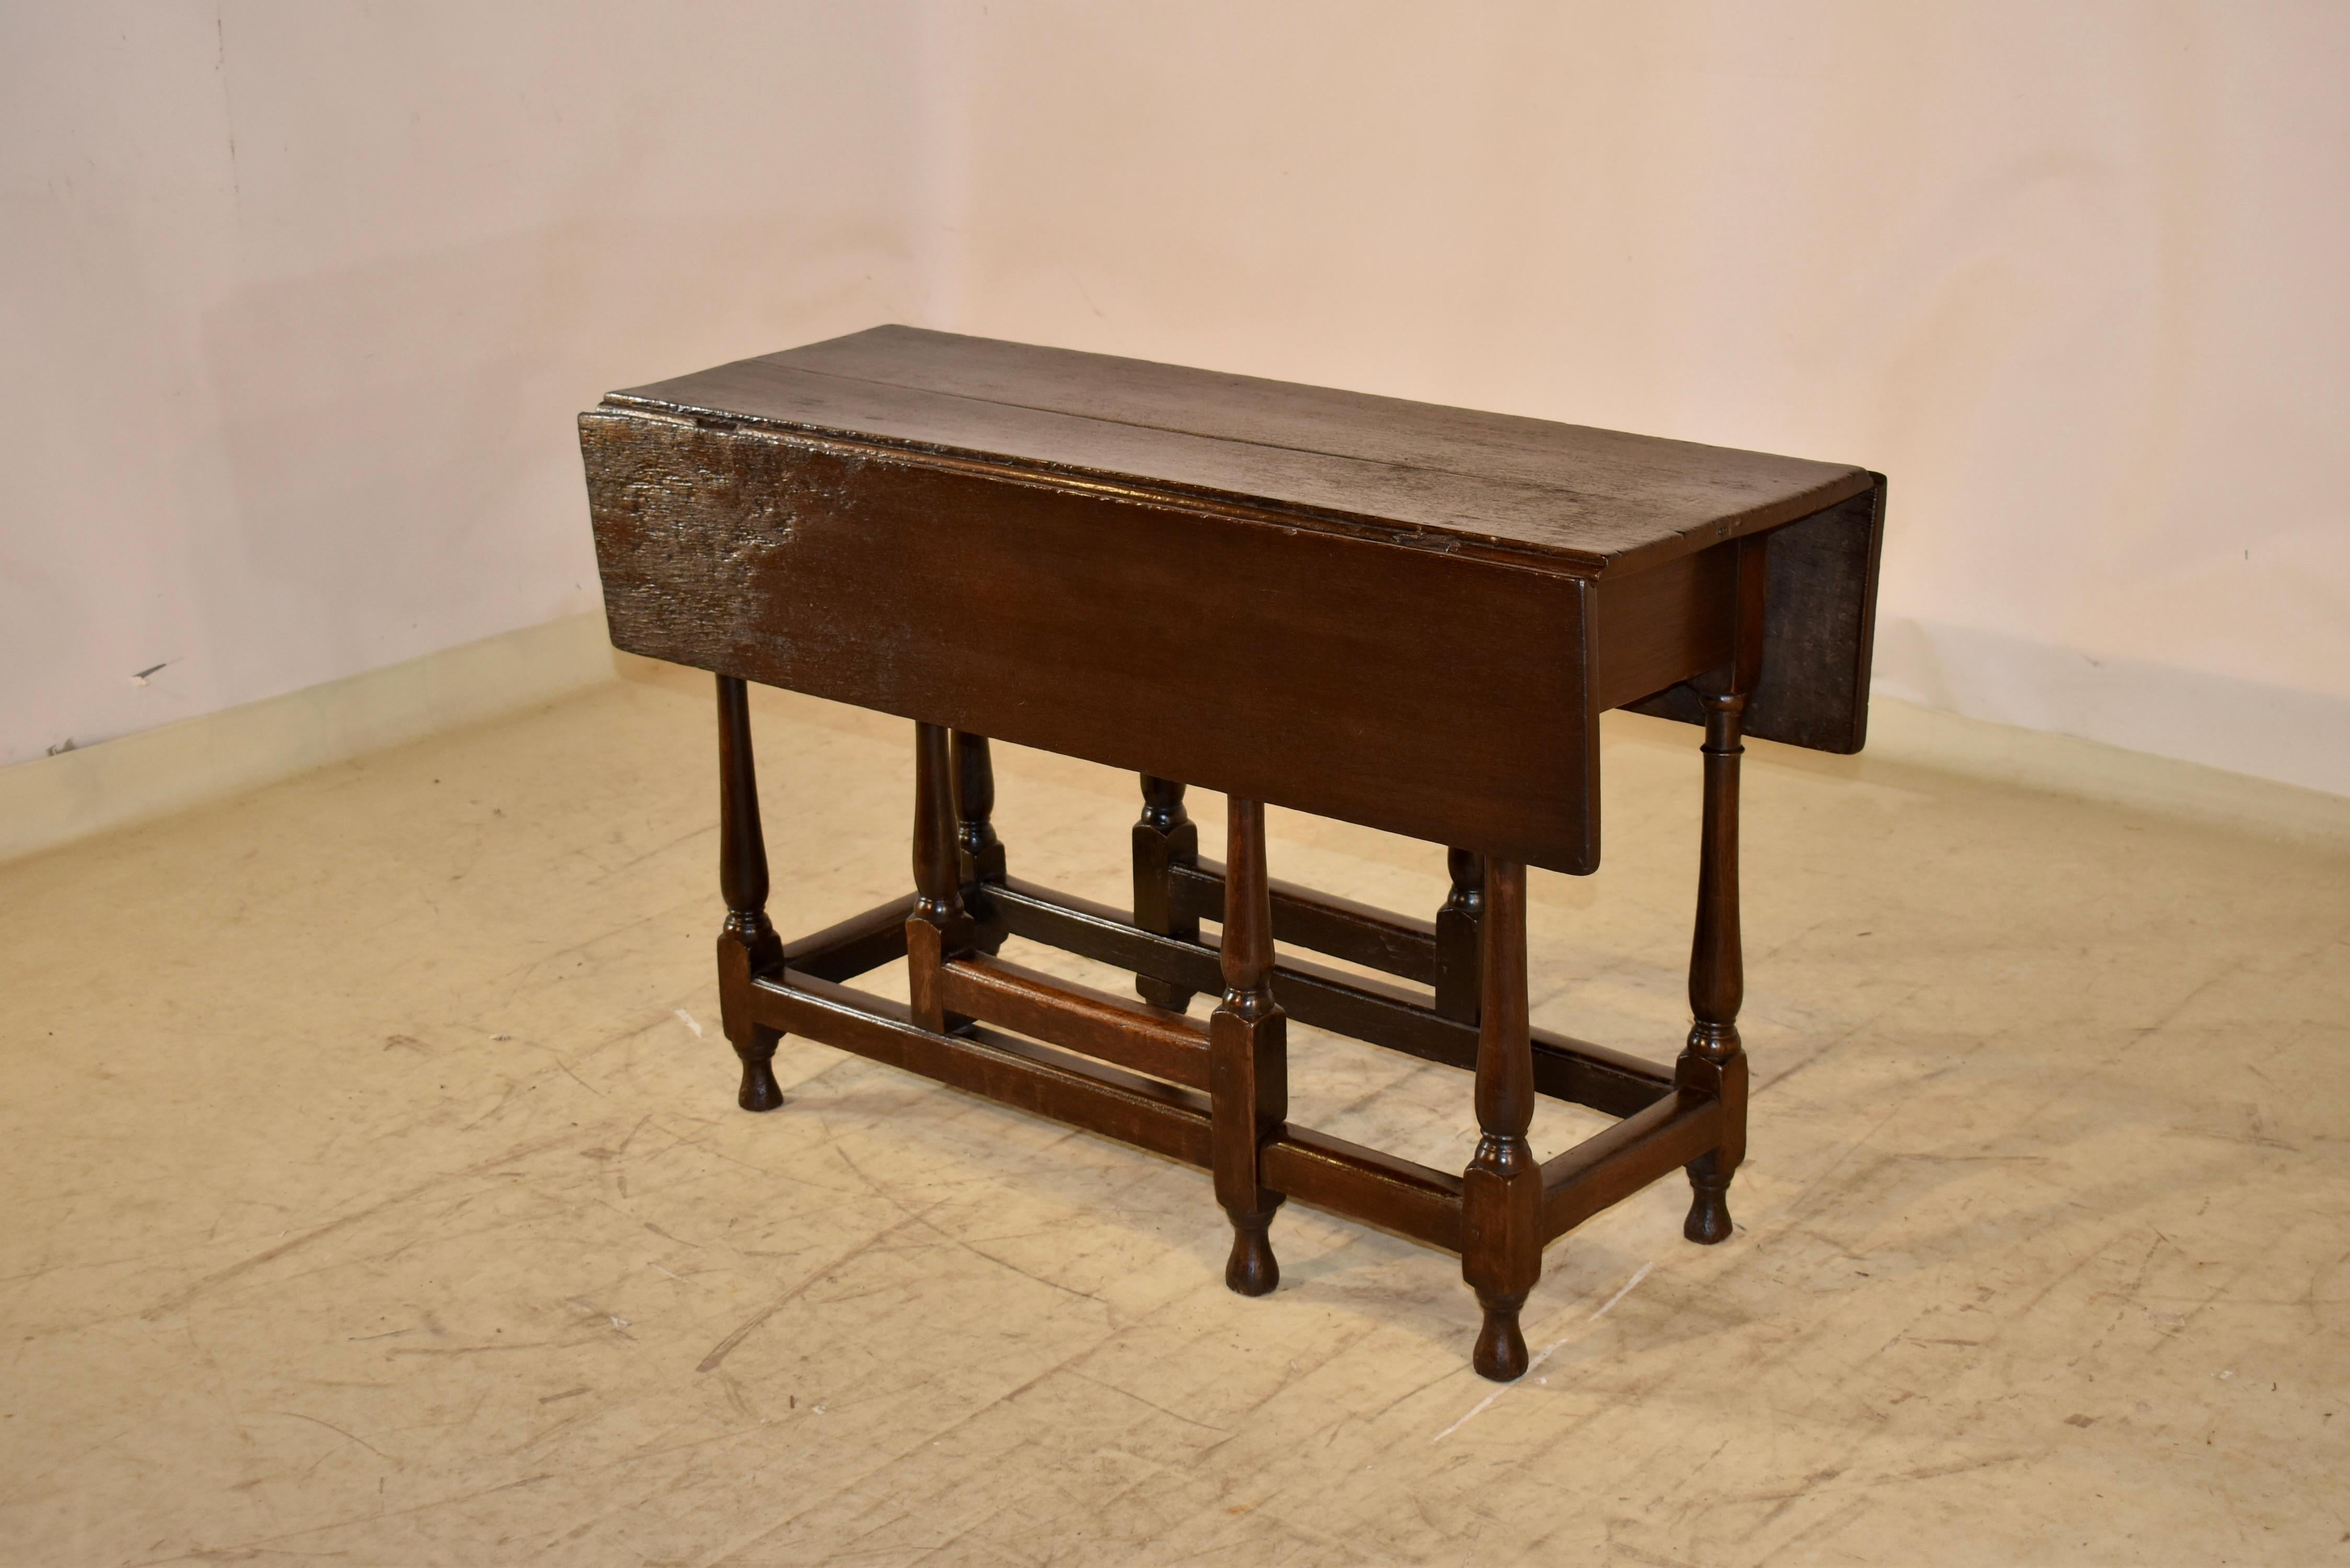 Late 17th - Early 18th Century Drop Leaf Table from England In Good Condition For Sale In High Point, NC